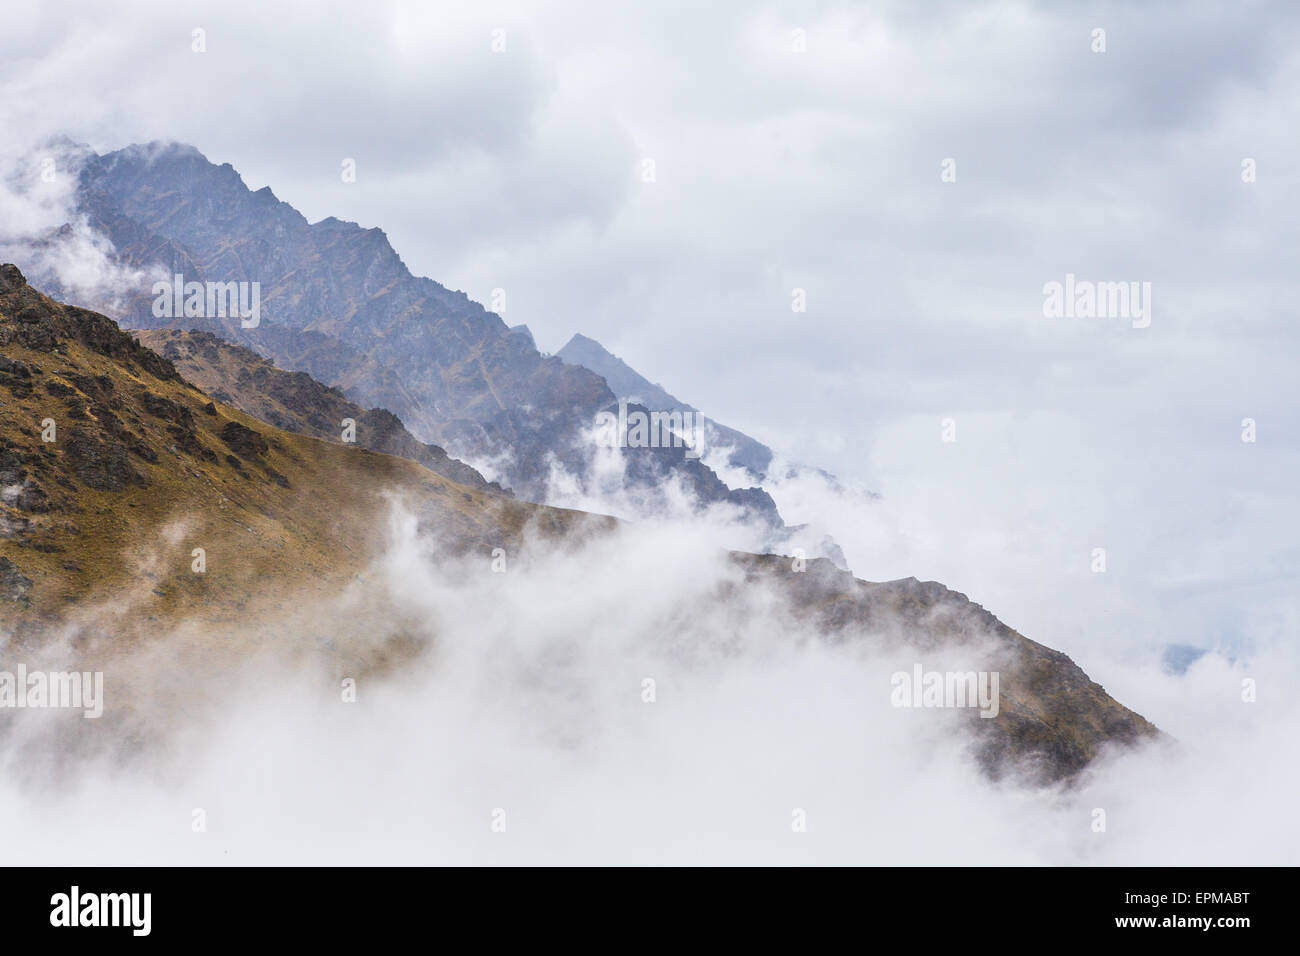 Rugged peaks showing above clouds at the Remarkables Ski Area, Queenstown, New Zealand. Stock Photo